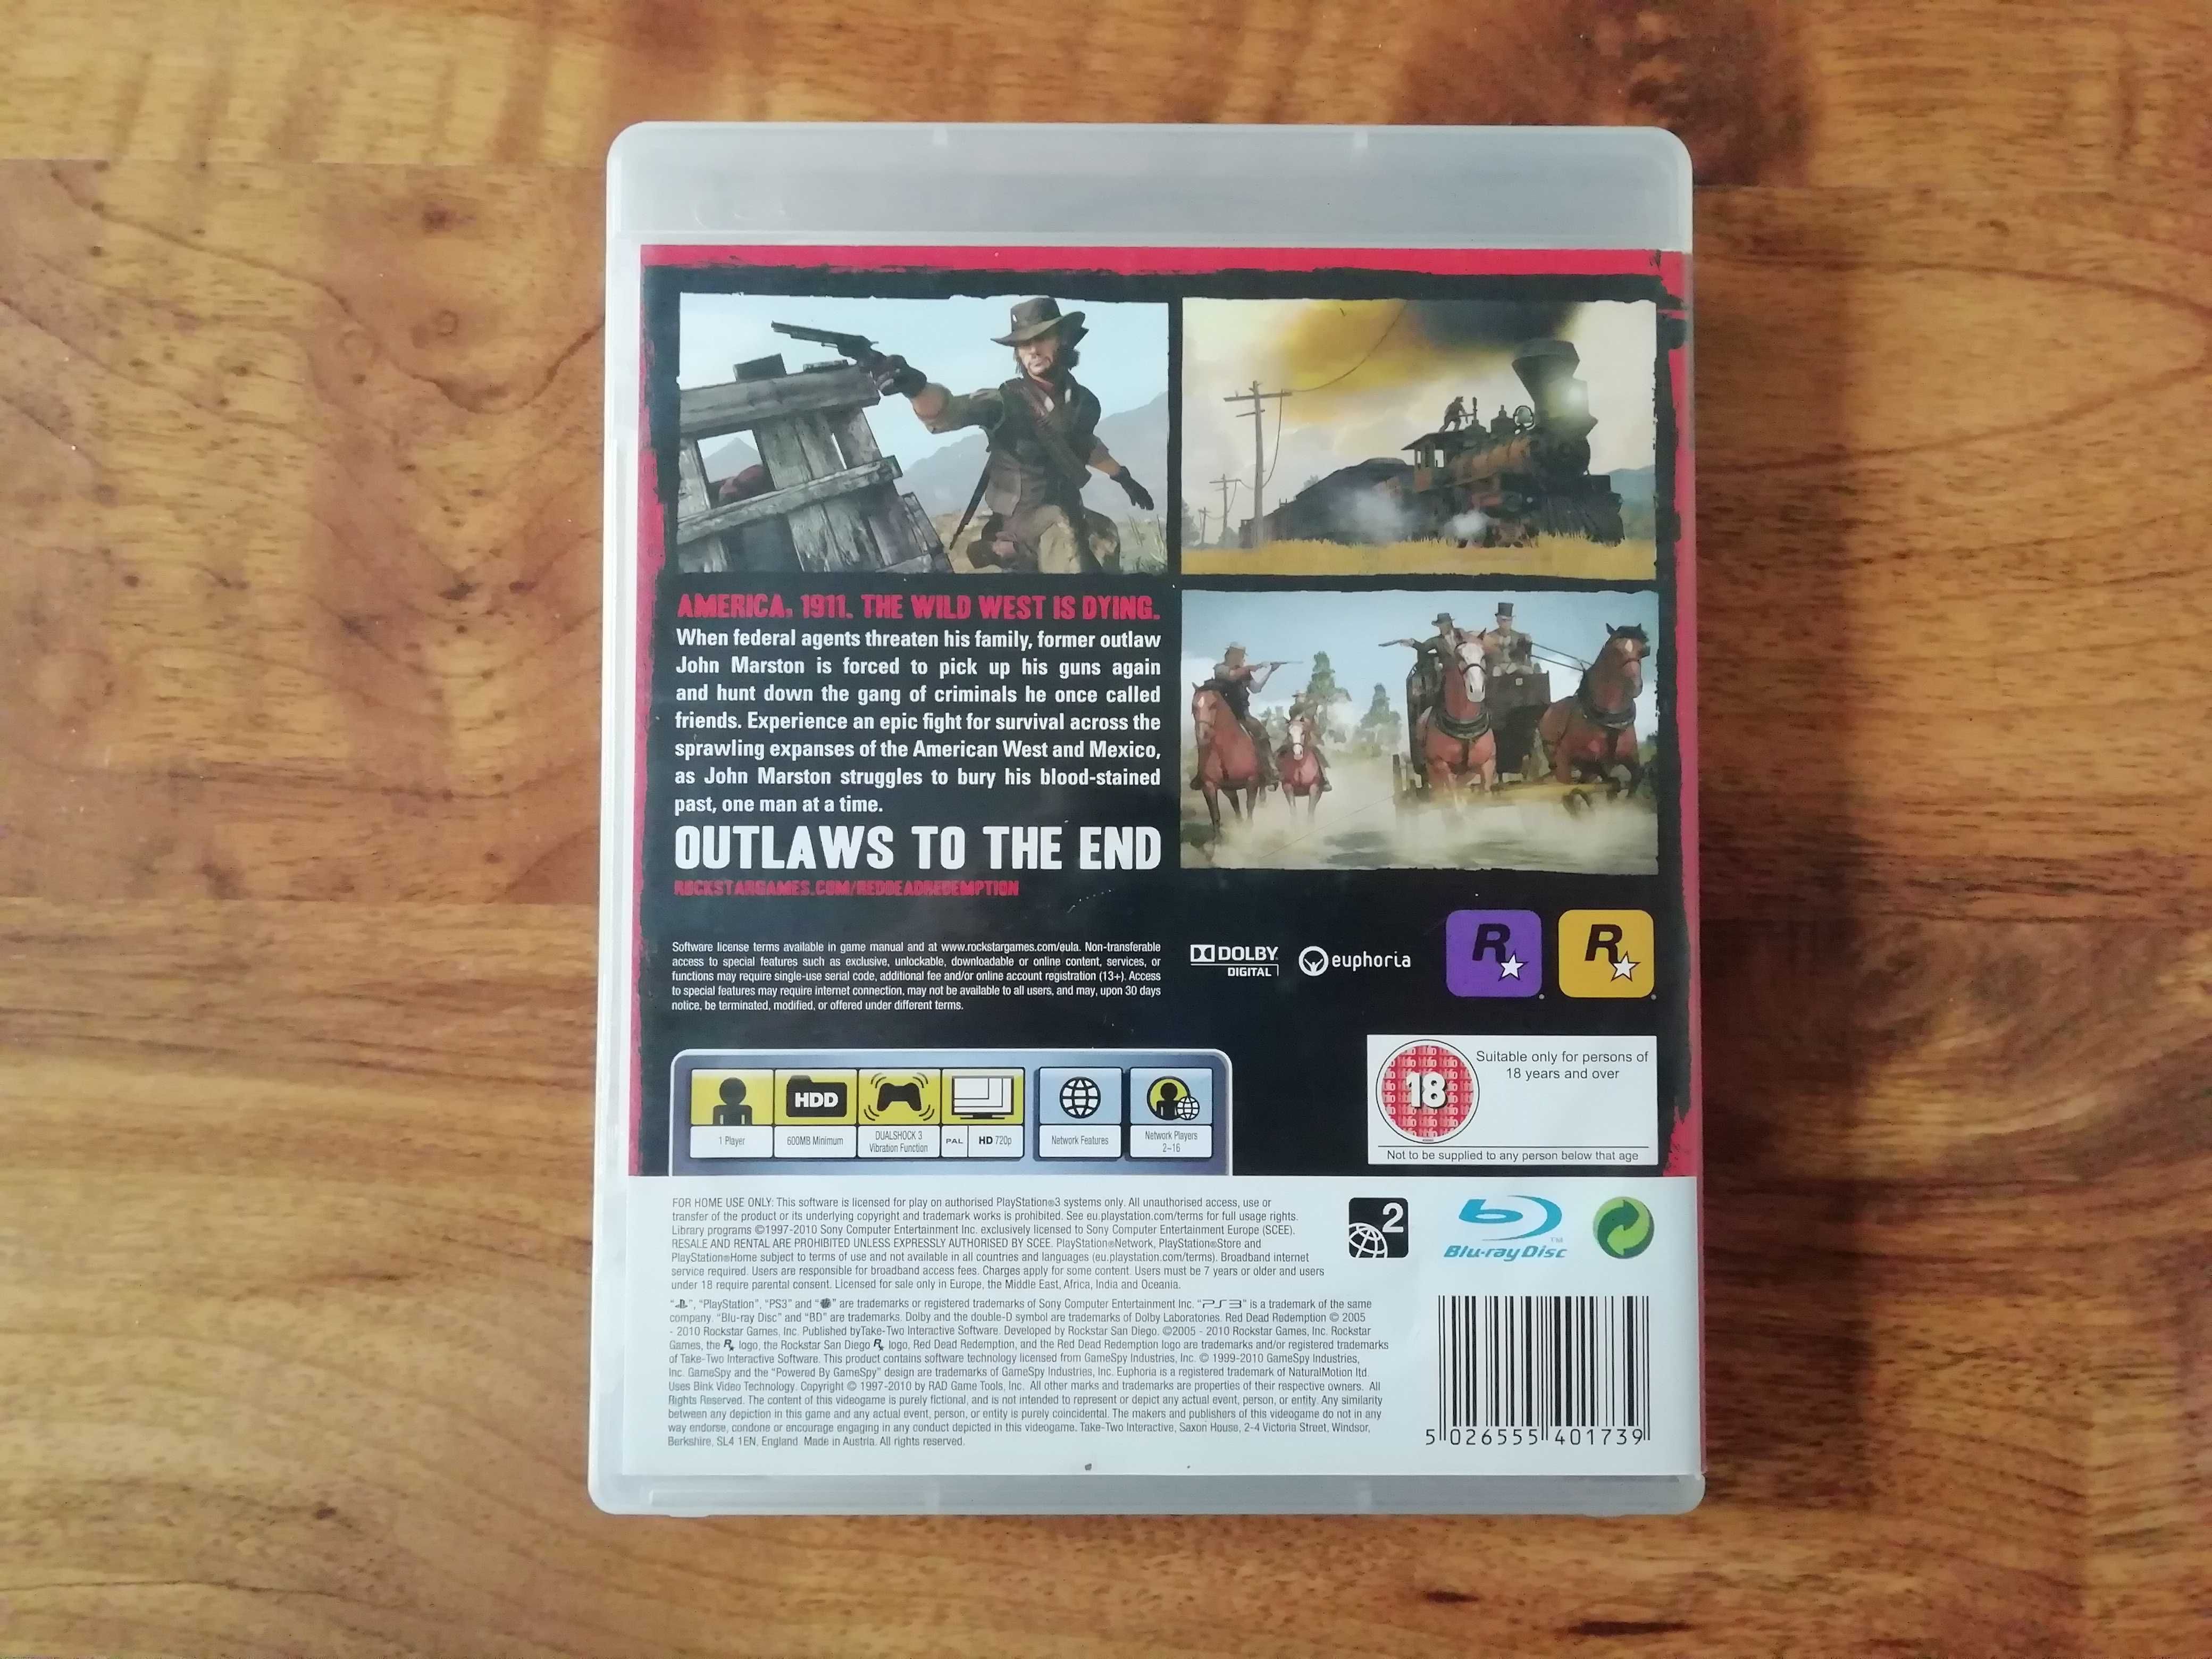 Red Dead Redemption RDR PS3